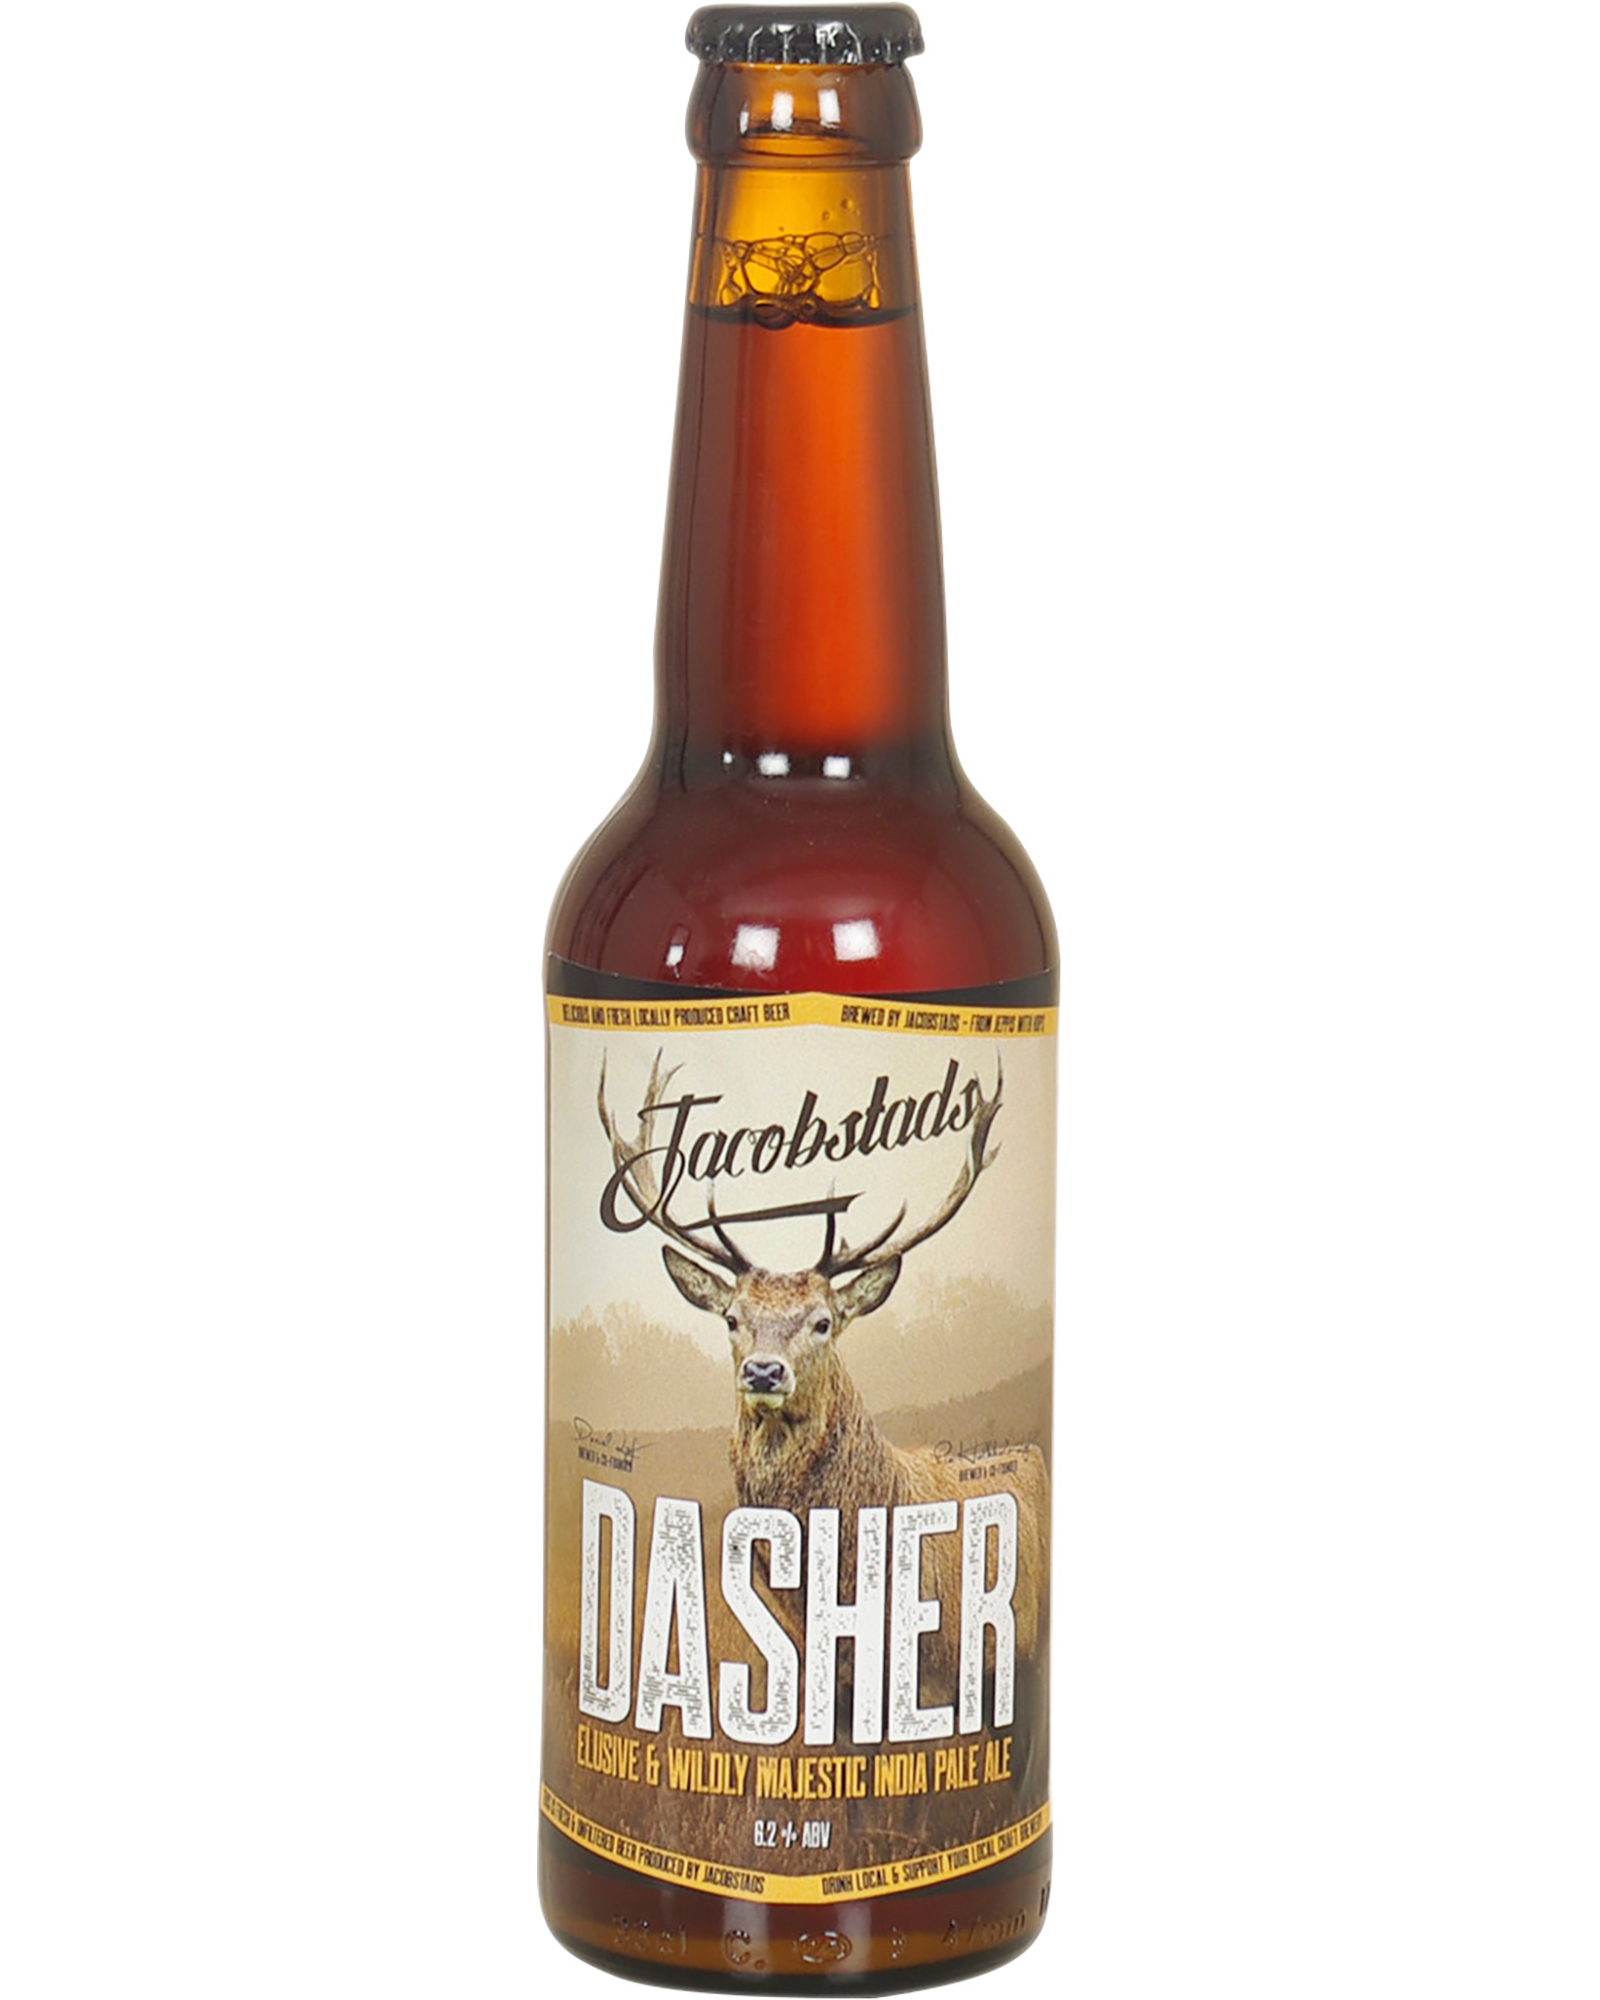 Jacobstads Dasher Majestic India Pale Ale